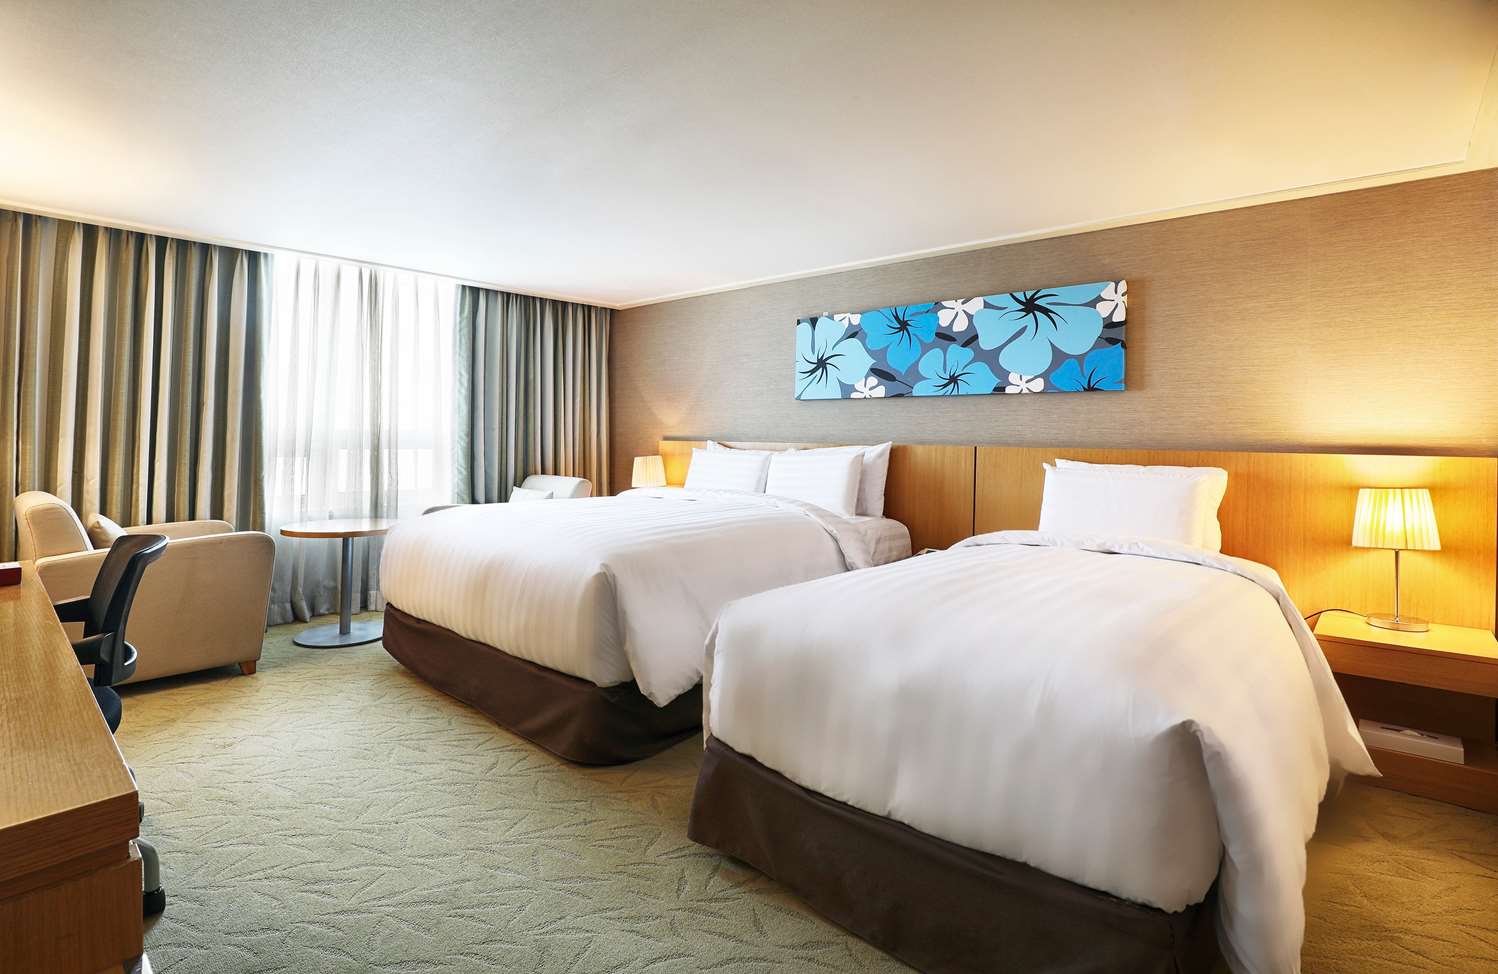 Paradise City at Incheon Aiport: South Korea sets high bar in airport  hotels